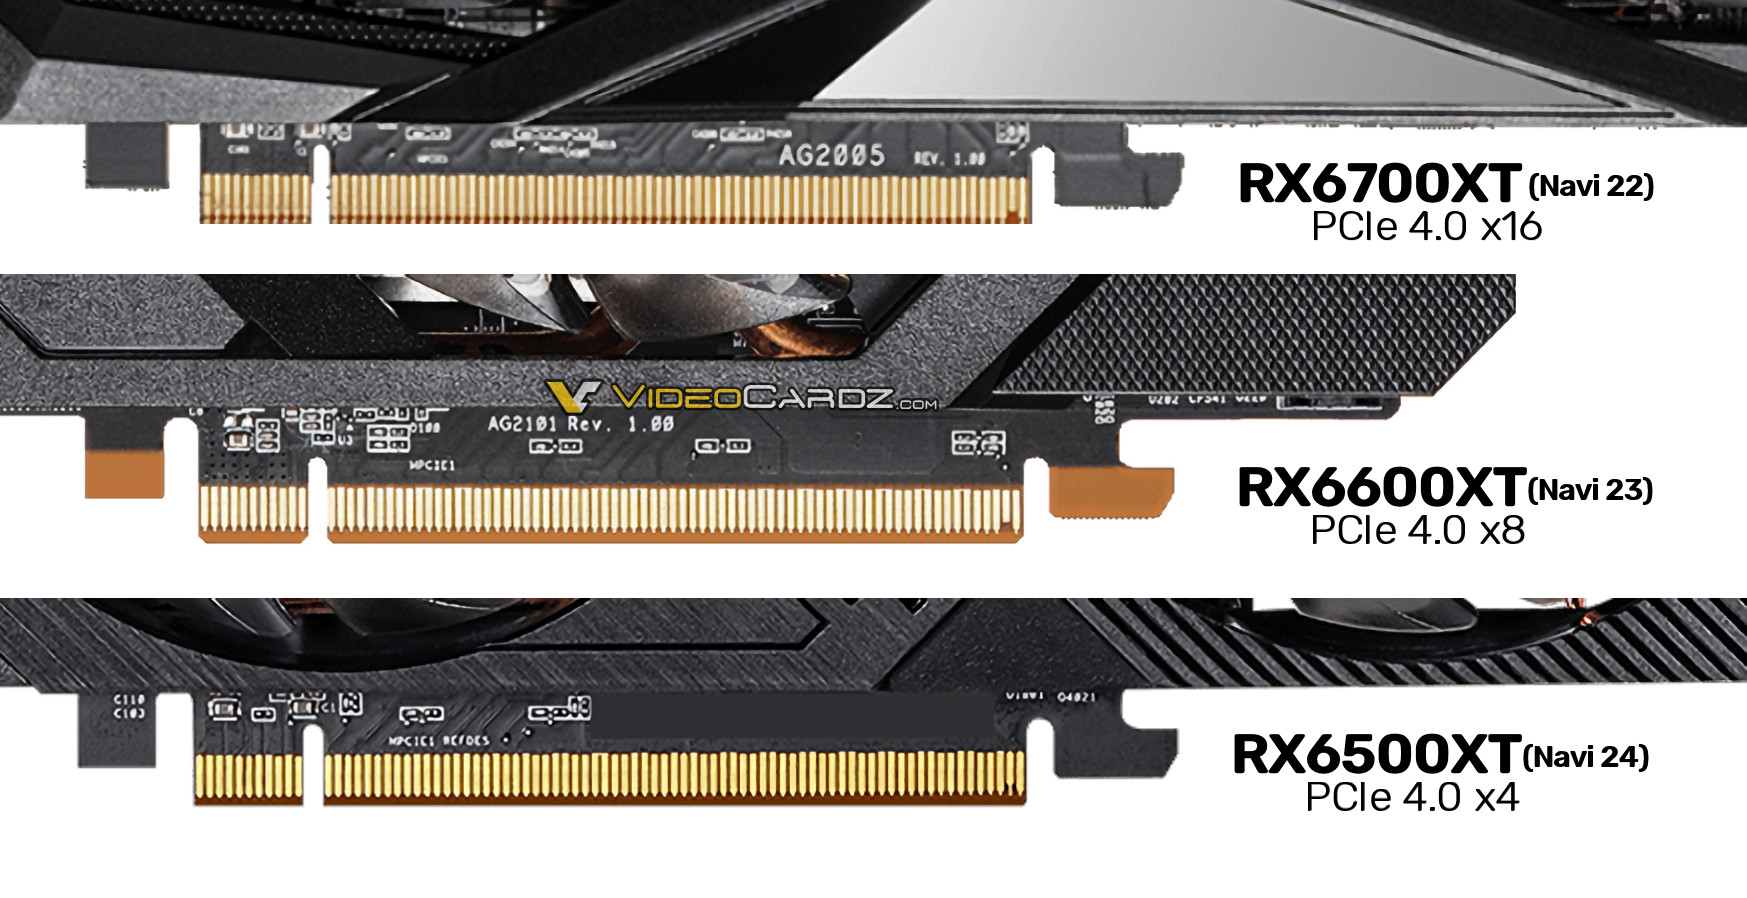 AMD's RX 6500 XT provides $199 entry point for desktop GPU line on